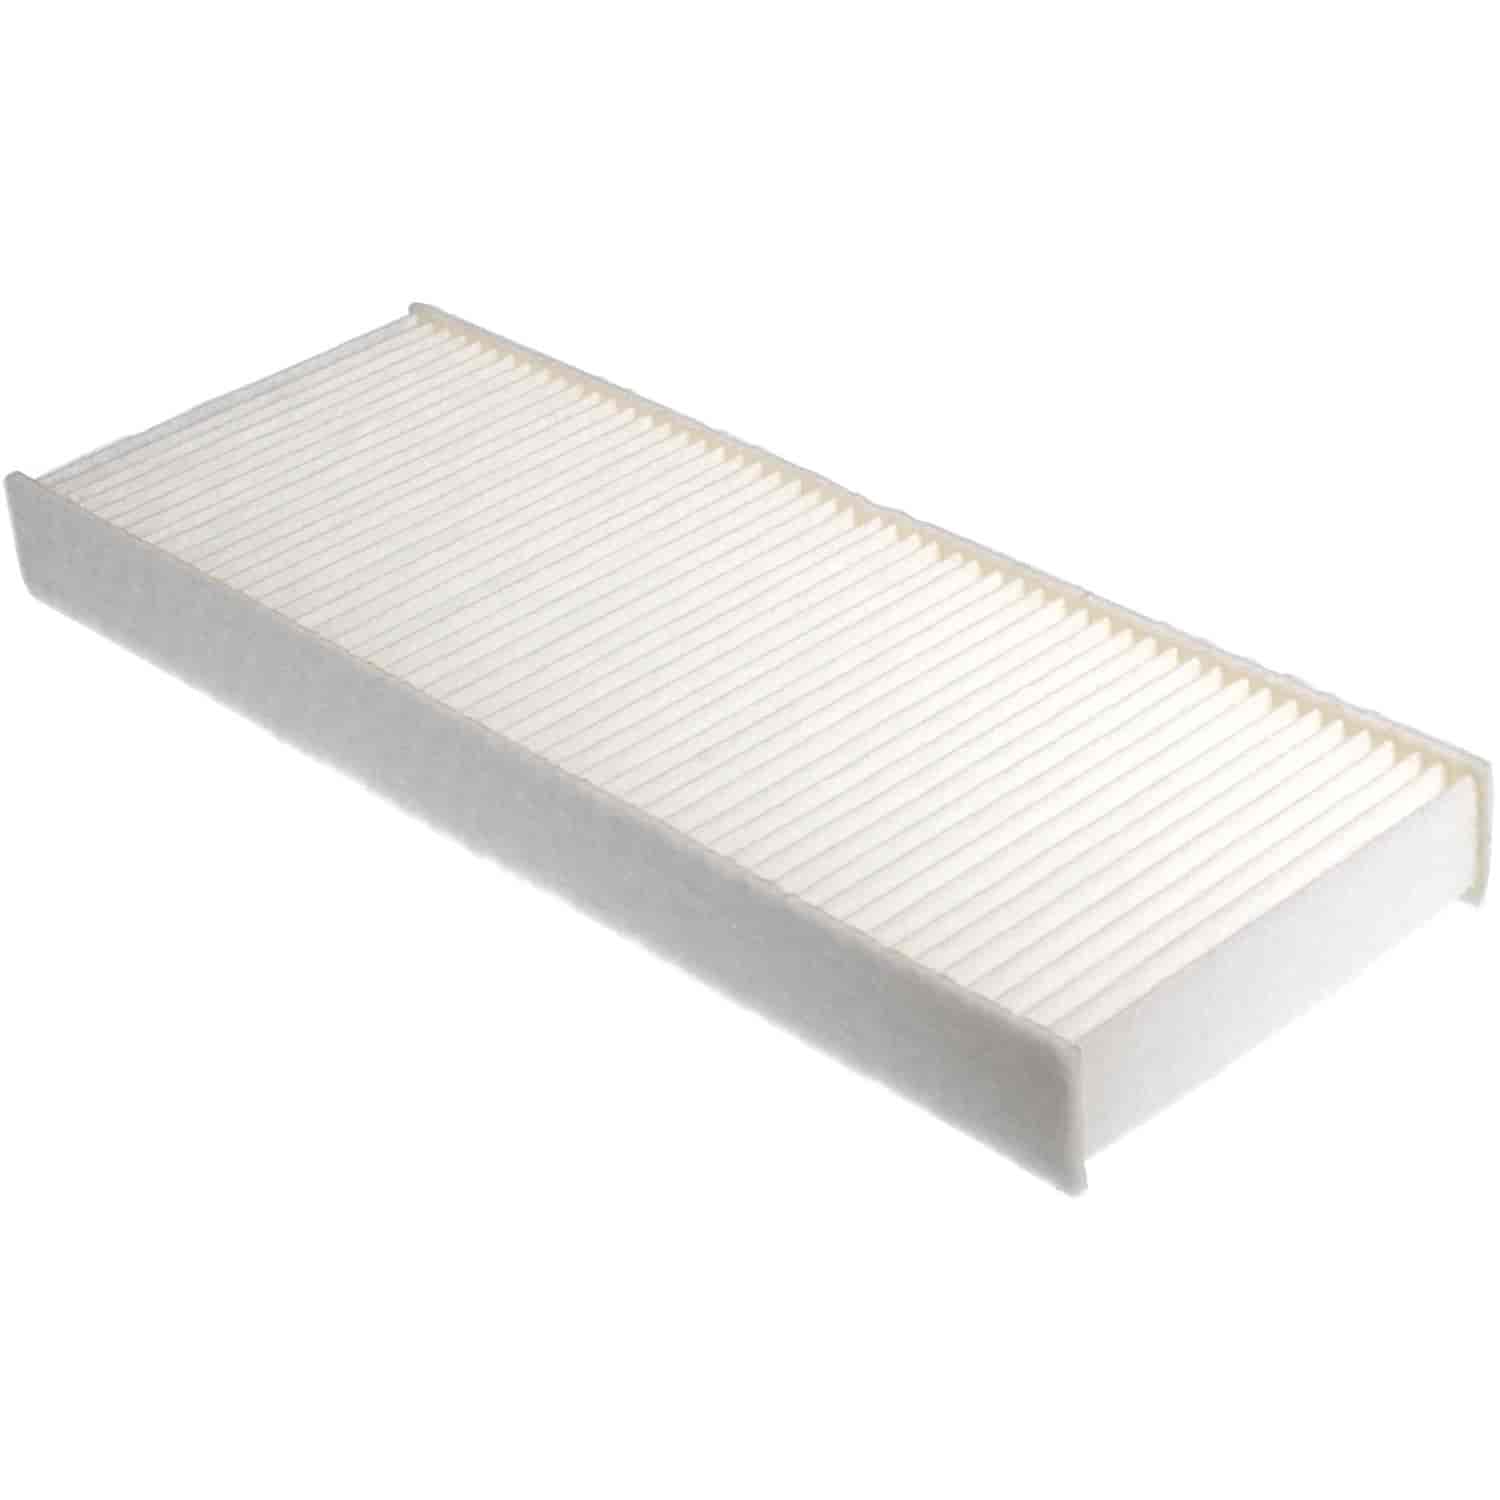 Mahle Cabin Air Filter for Nissan Frontier Pathfinder 05-08 Xterra 06-08